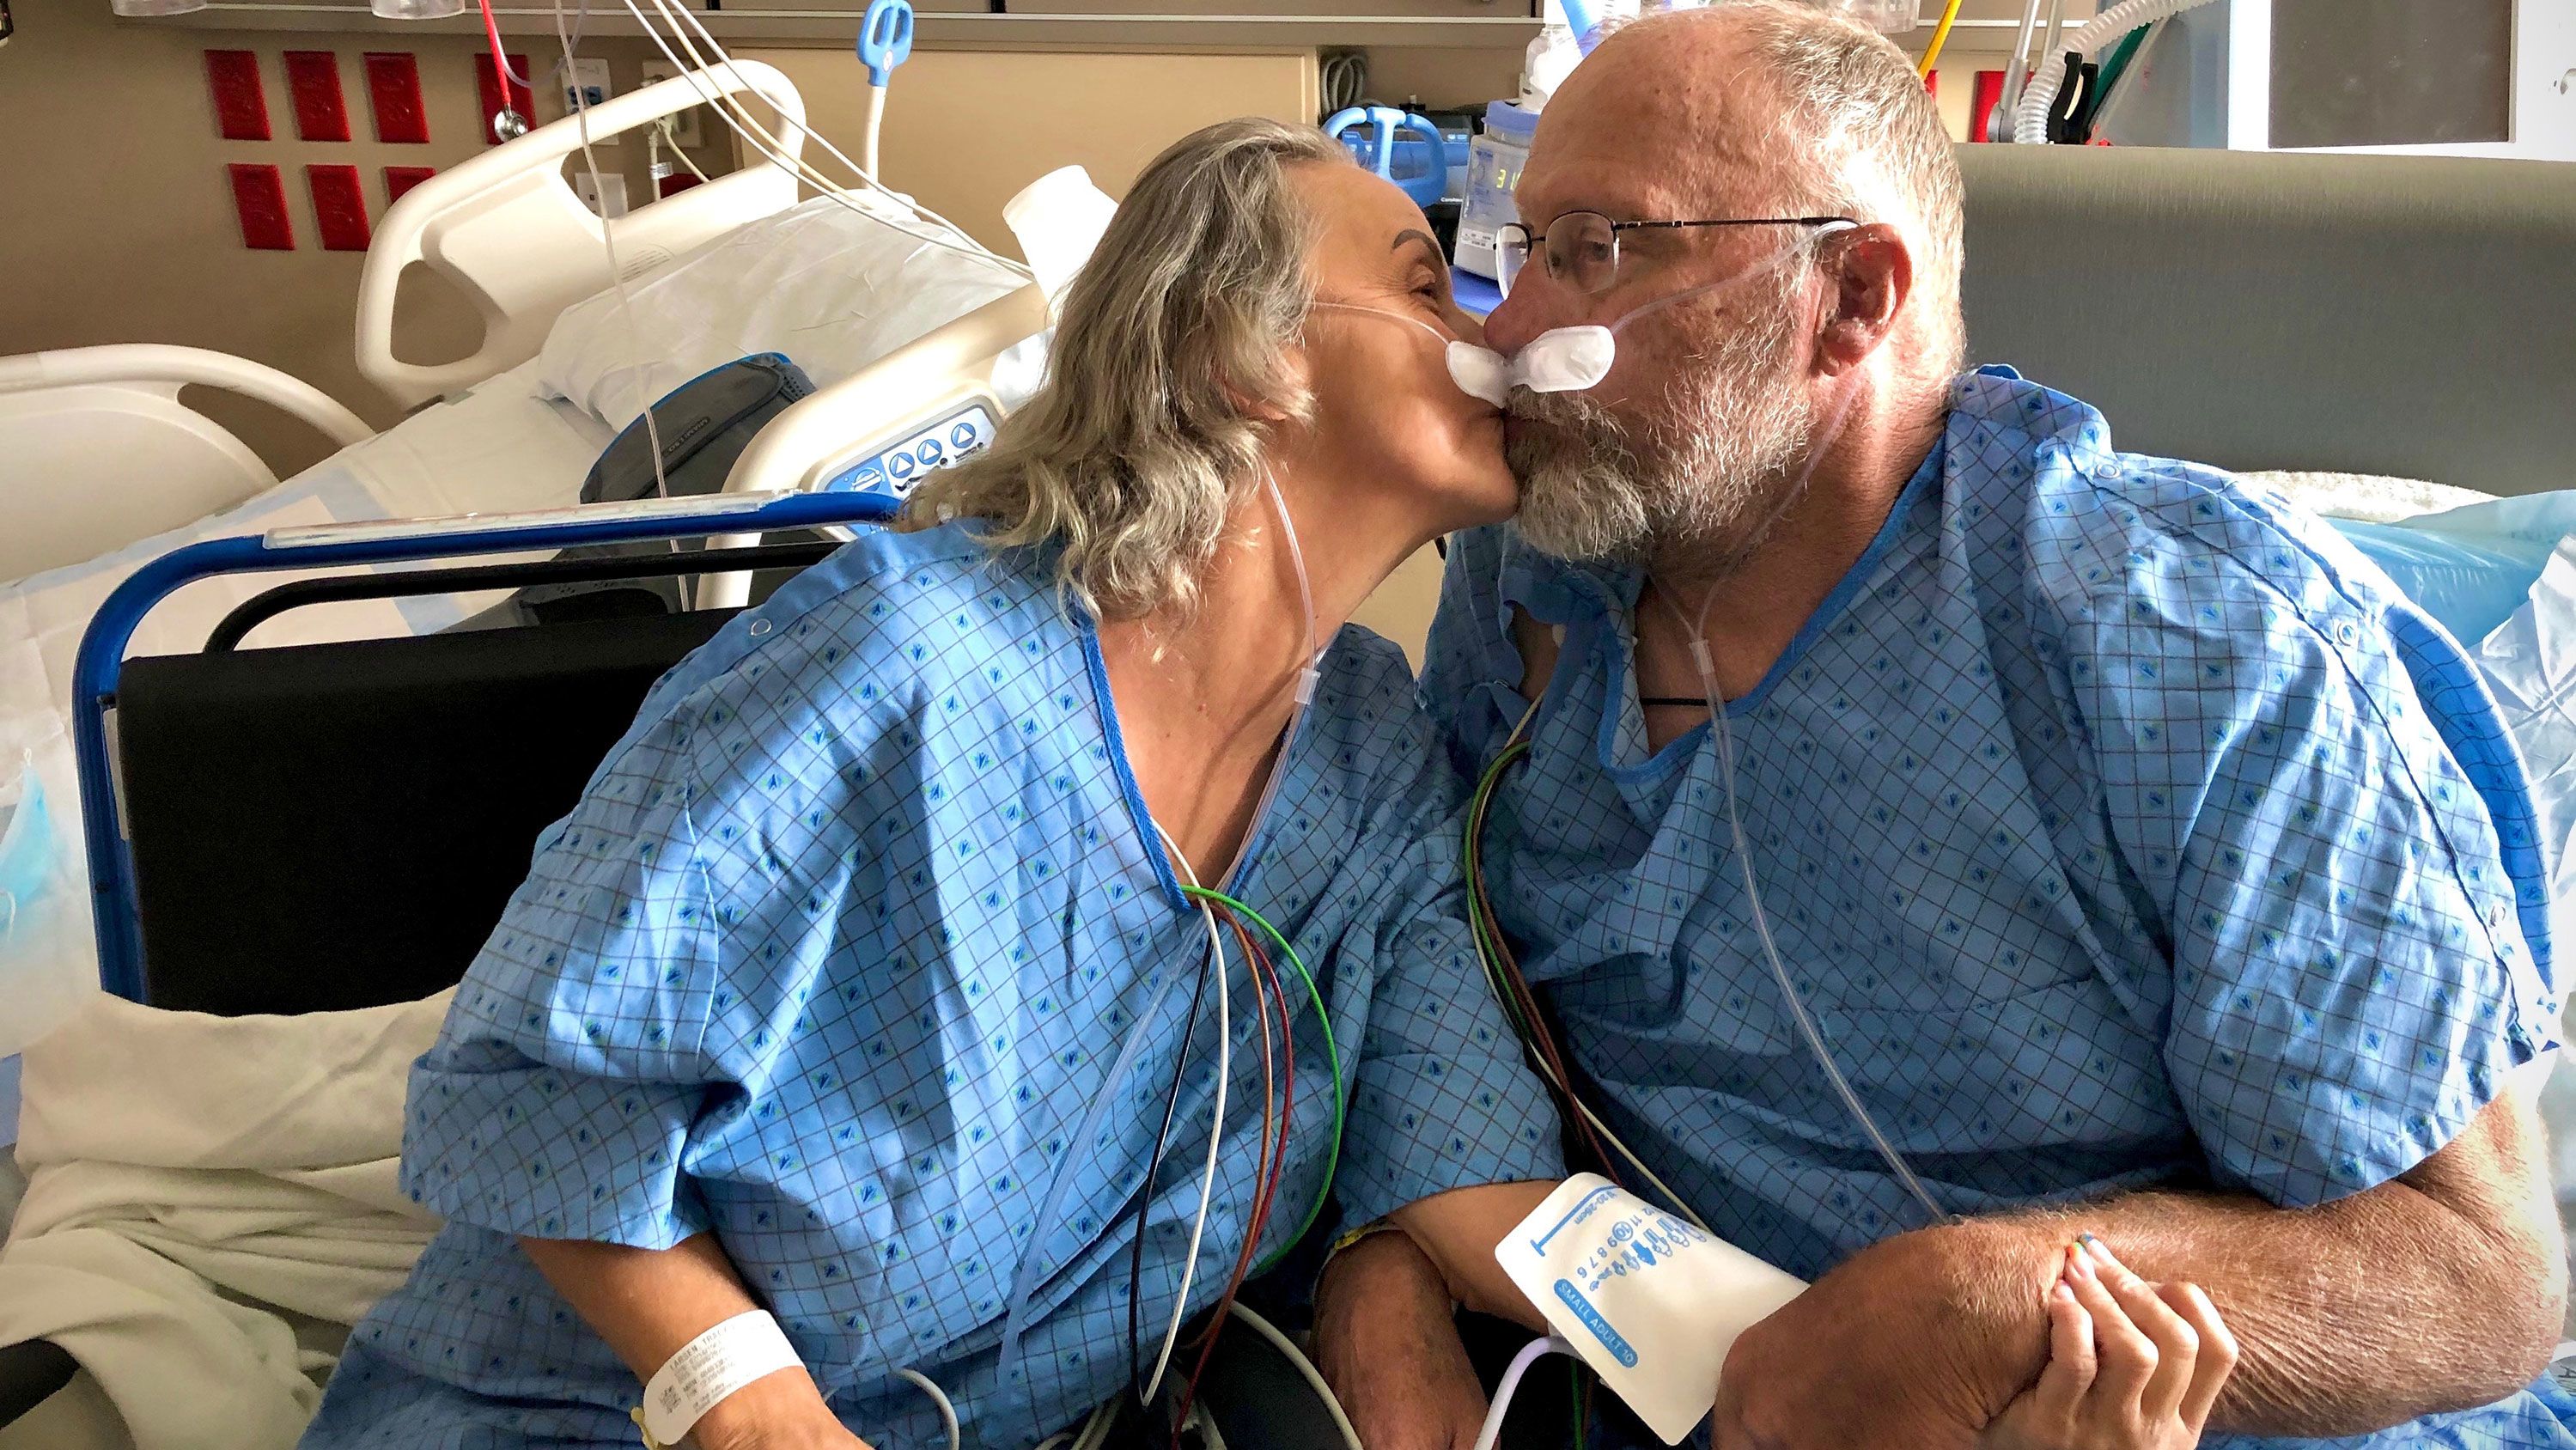 Chad and Tracy Larsen share a date night for their 34th wedding anniversary at a Utah ICU ward, where both were fighting for their lives after contracting Covid-19. It would be their last date together.  